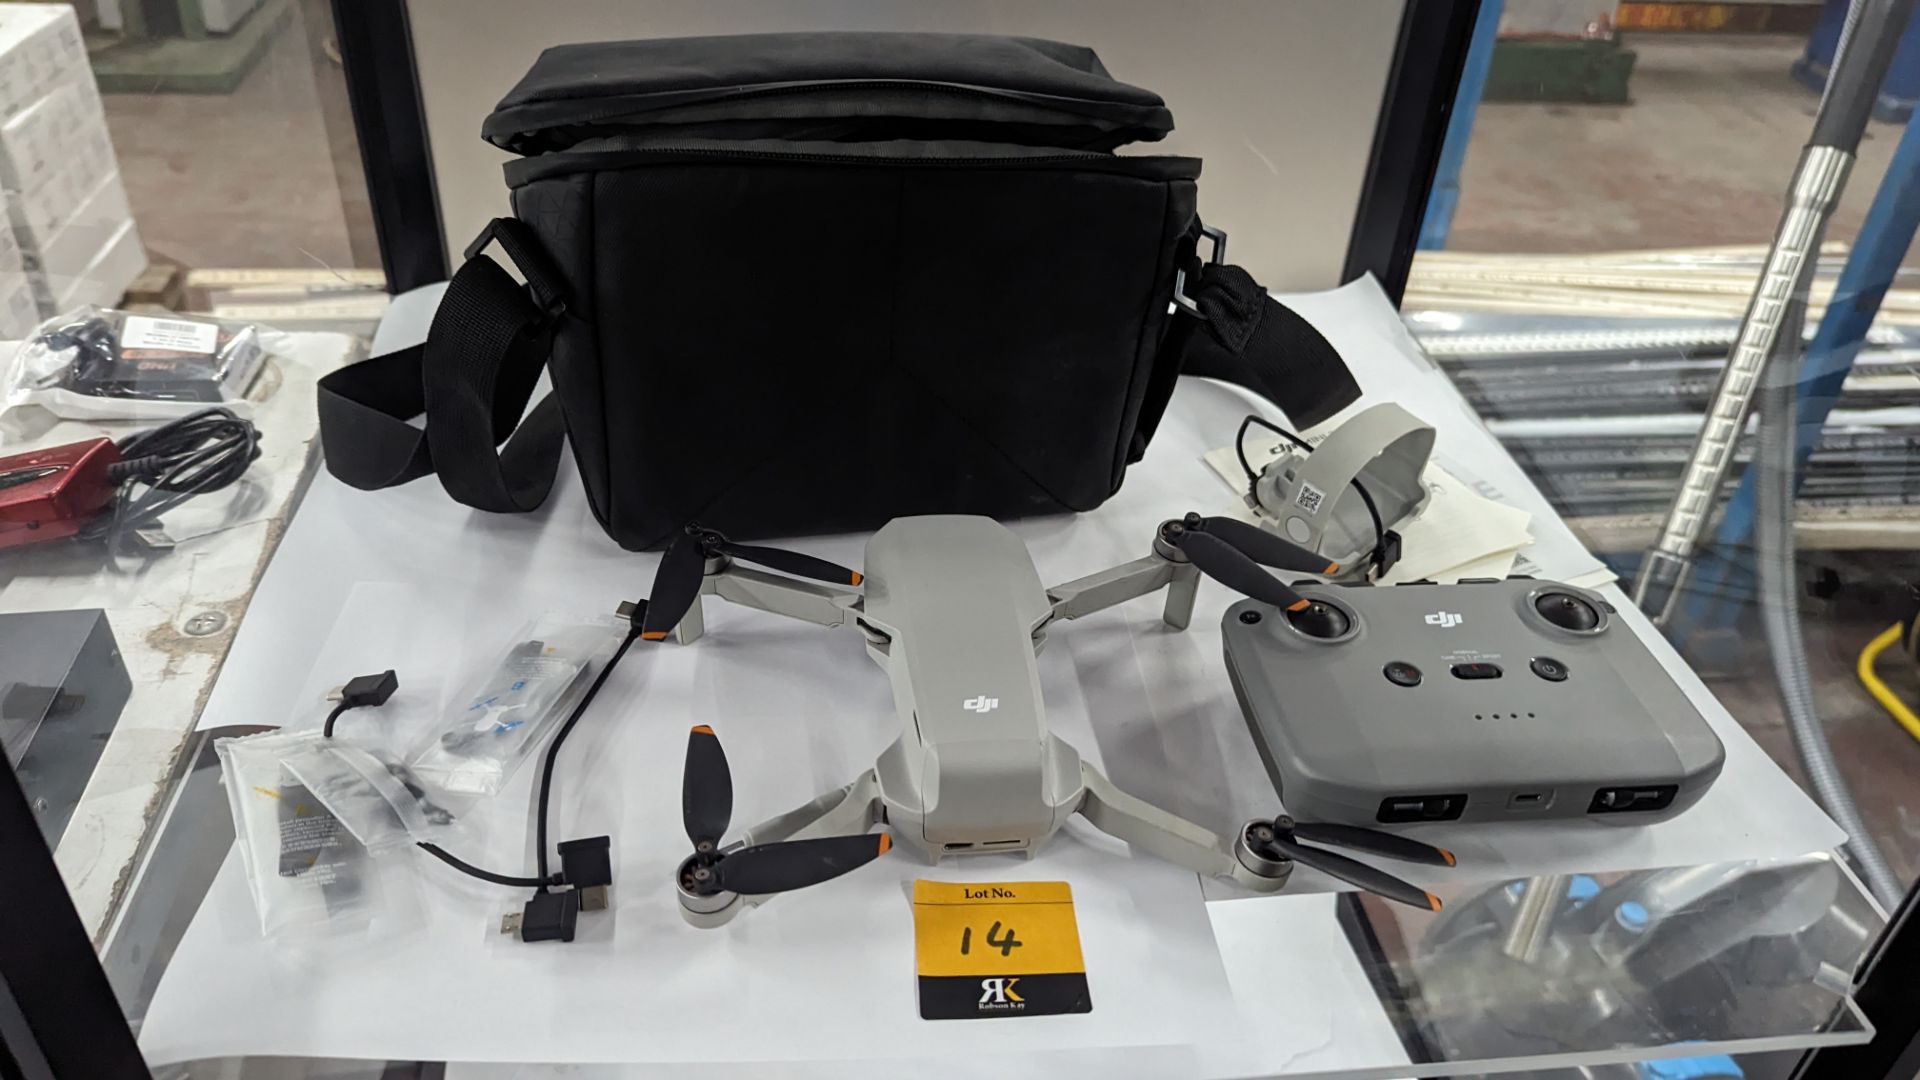 DJI Mini 2 drone including soft carry case, controller and other ancillaries. NB: no battery